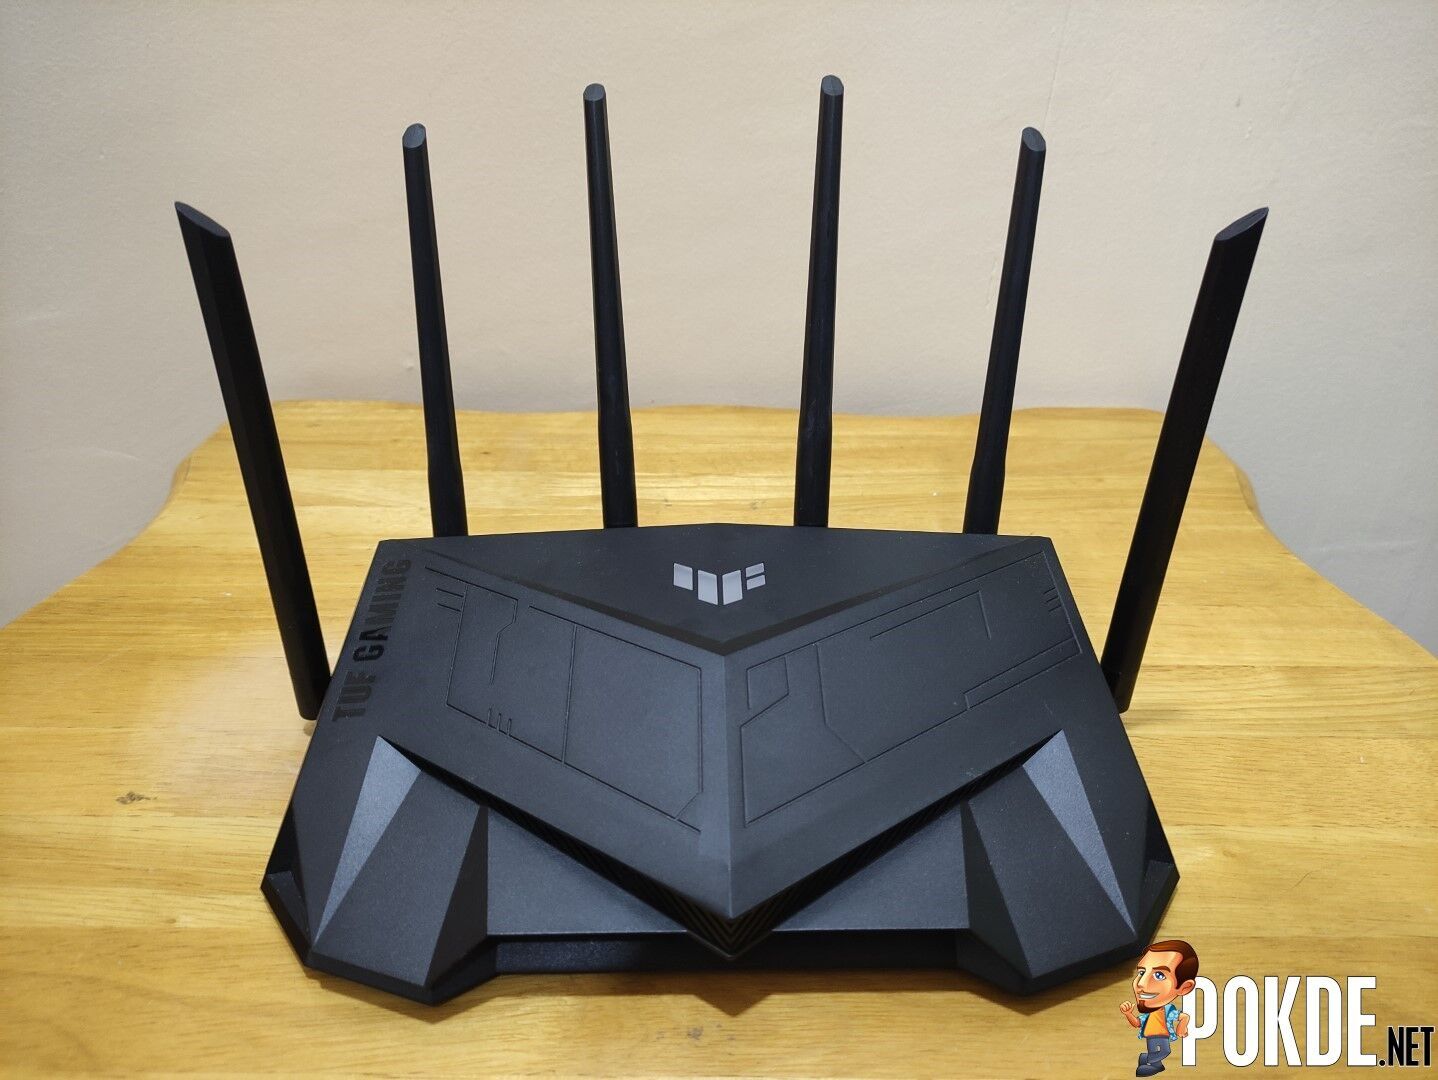 ASUS TUF Gaming AX5400 Router Review - Budget Friendly Router For Your Gaming Needs 20